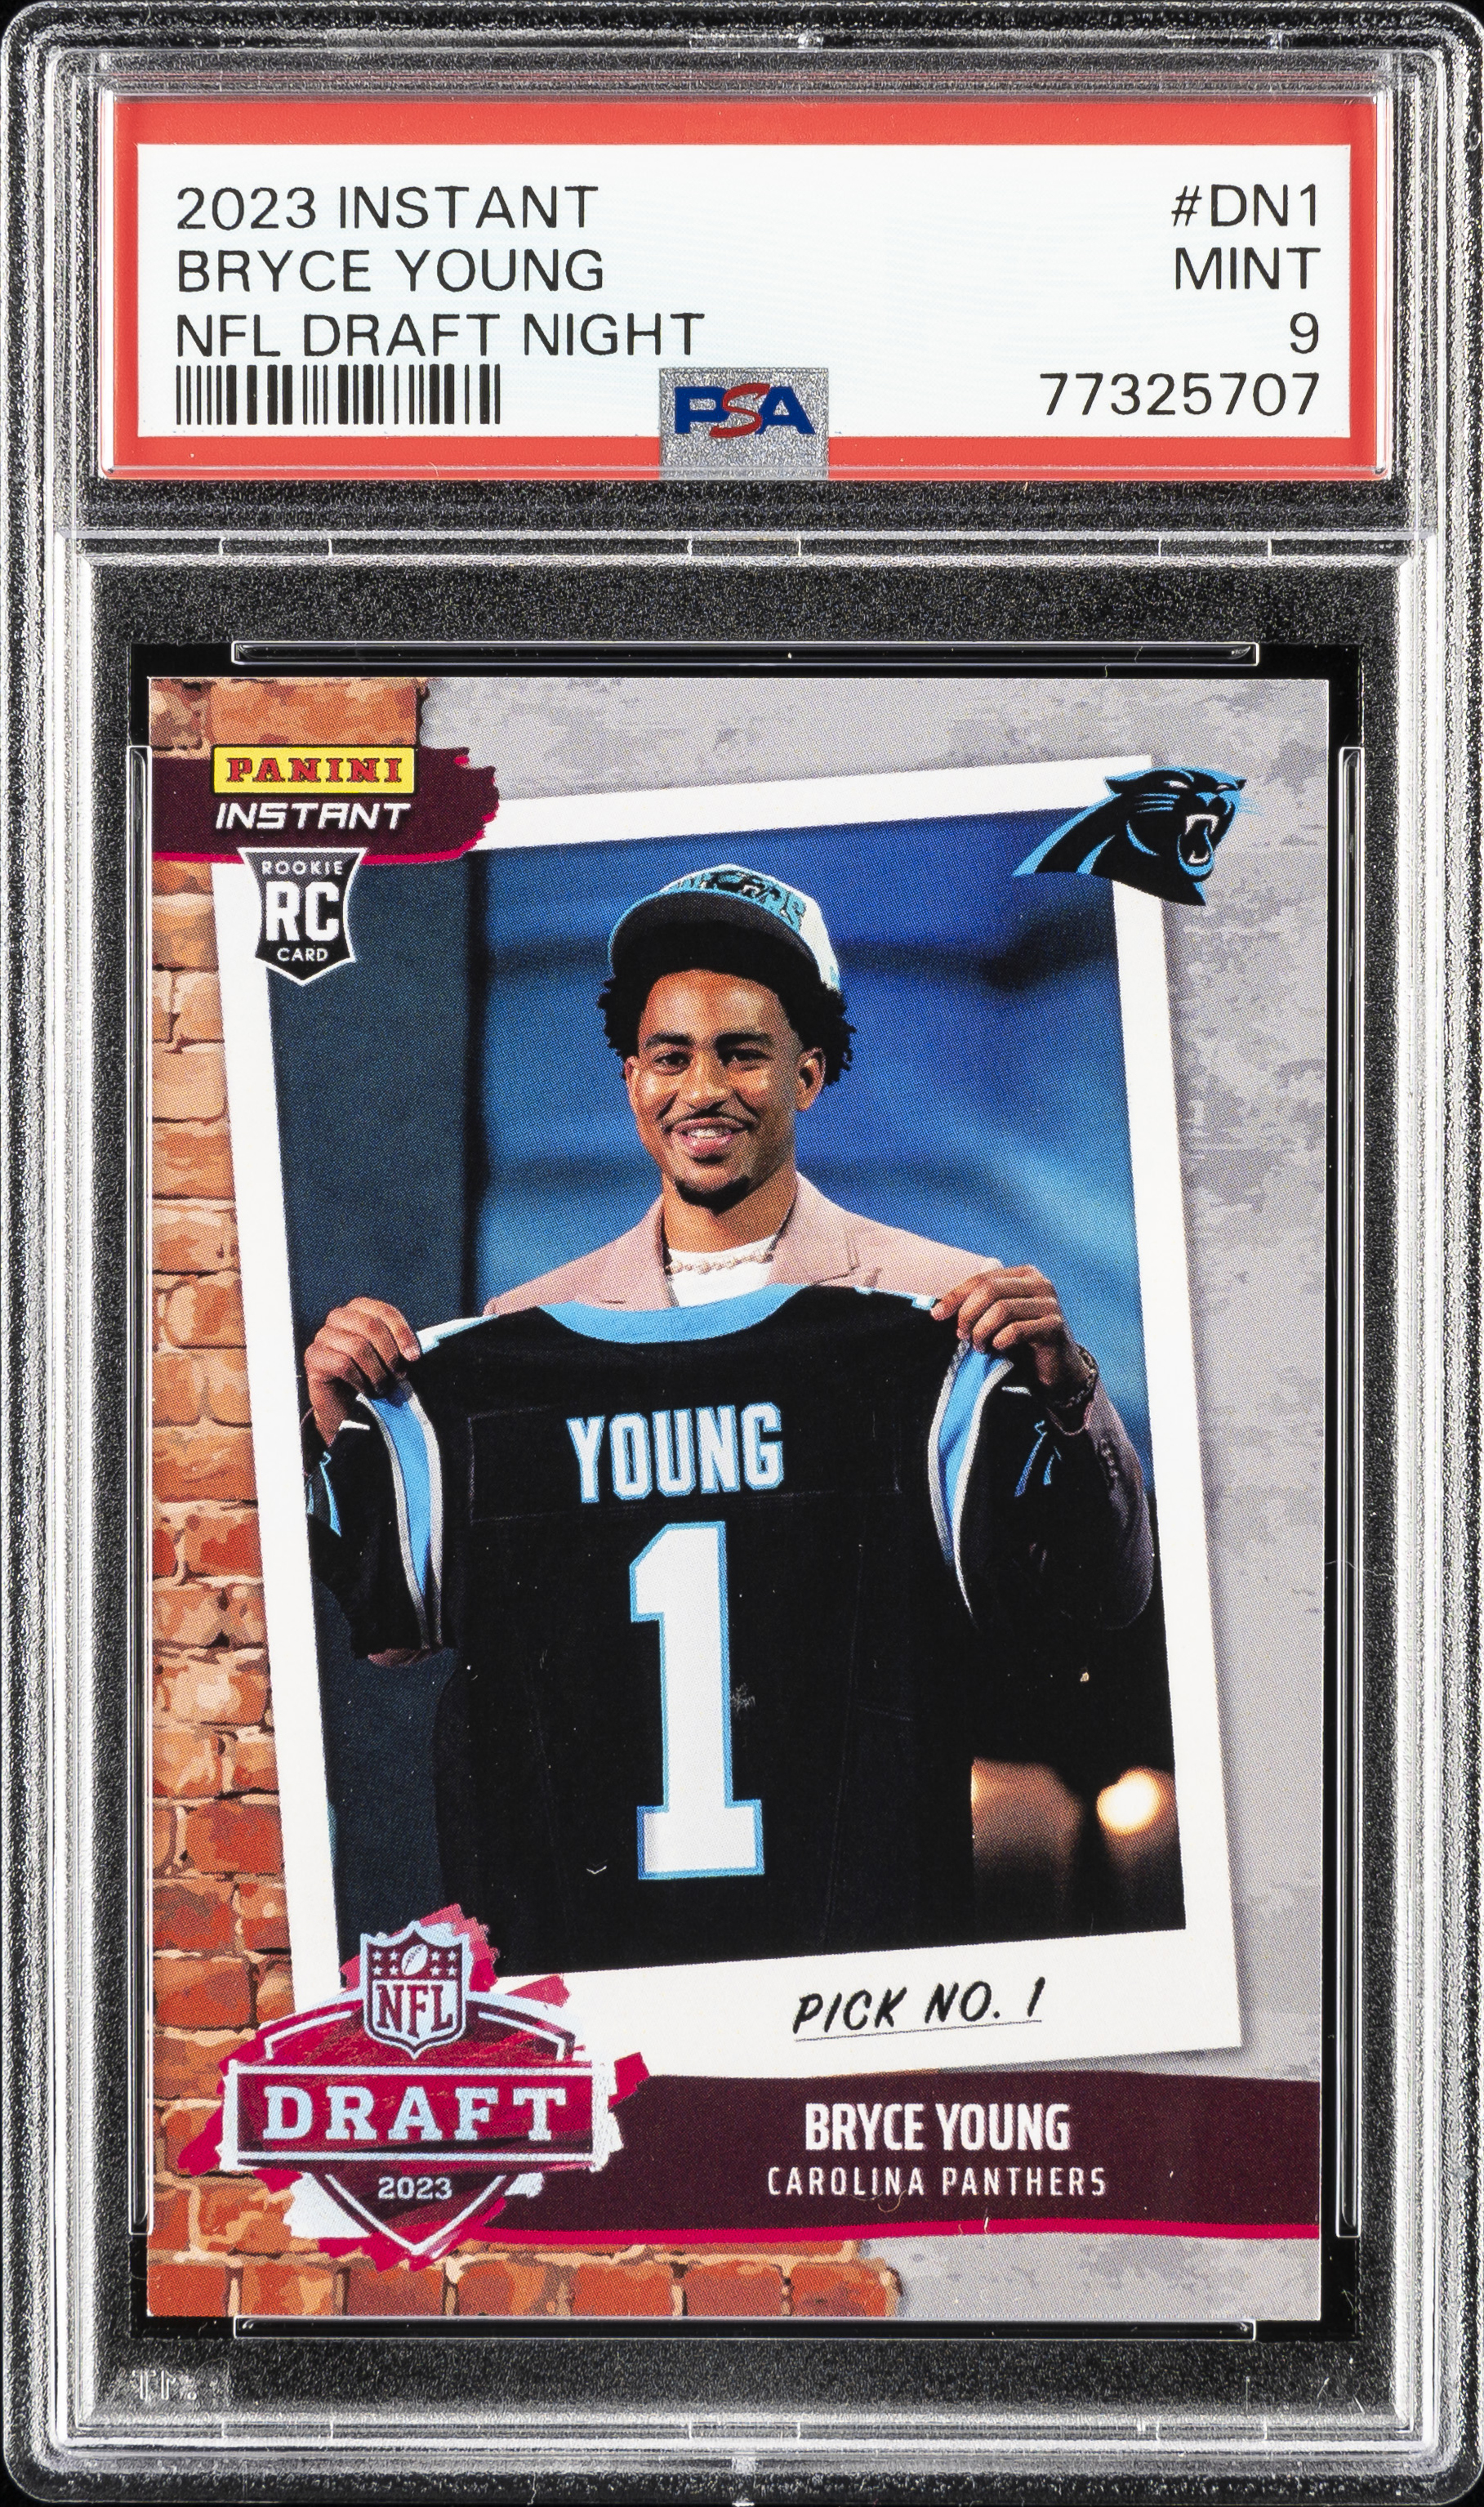 2023 Panini Instant NFL Draft Night #DN1 Bryce Young Rookie Card – PSA MINT 9